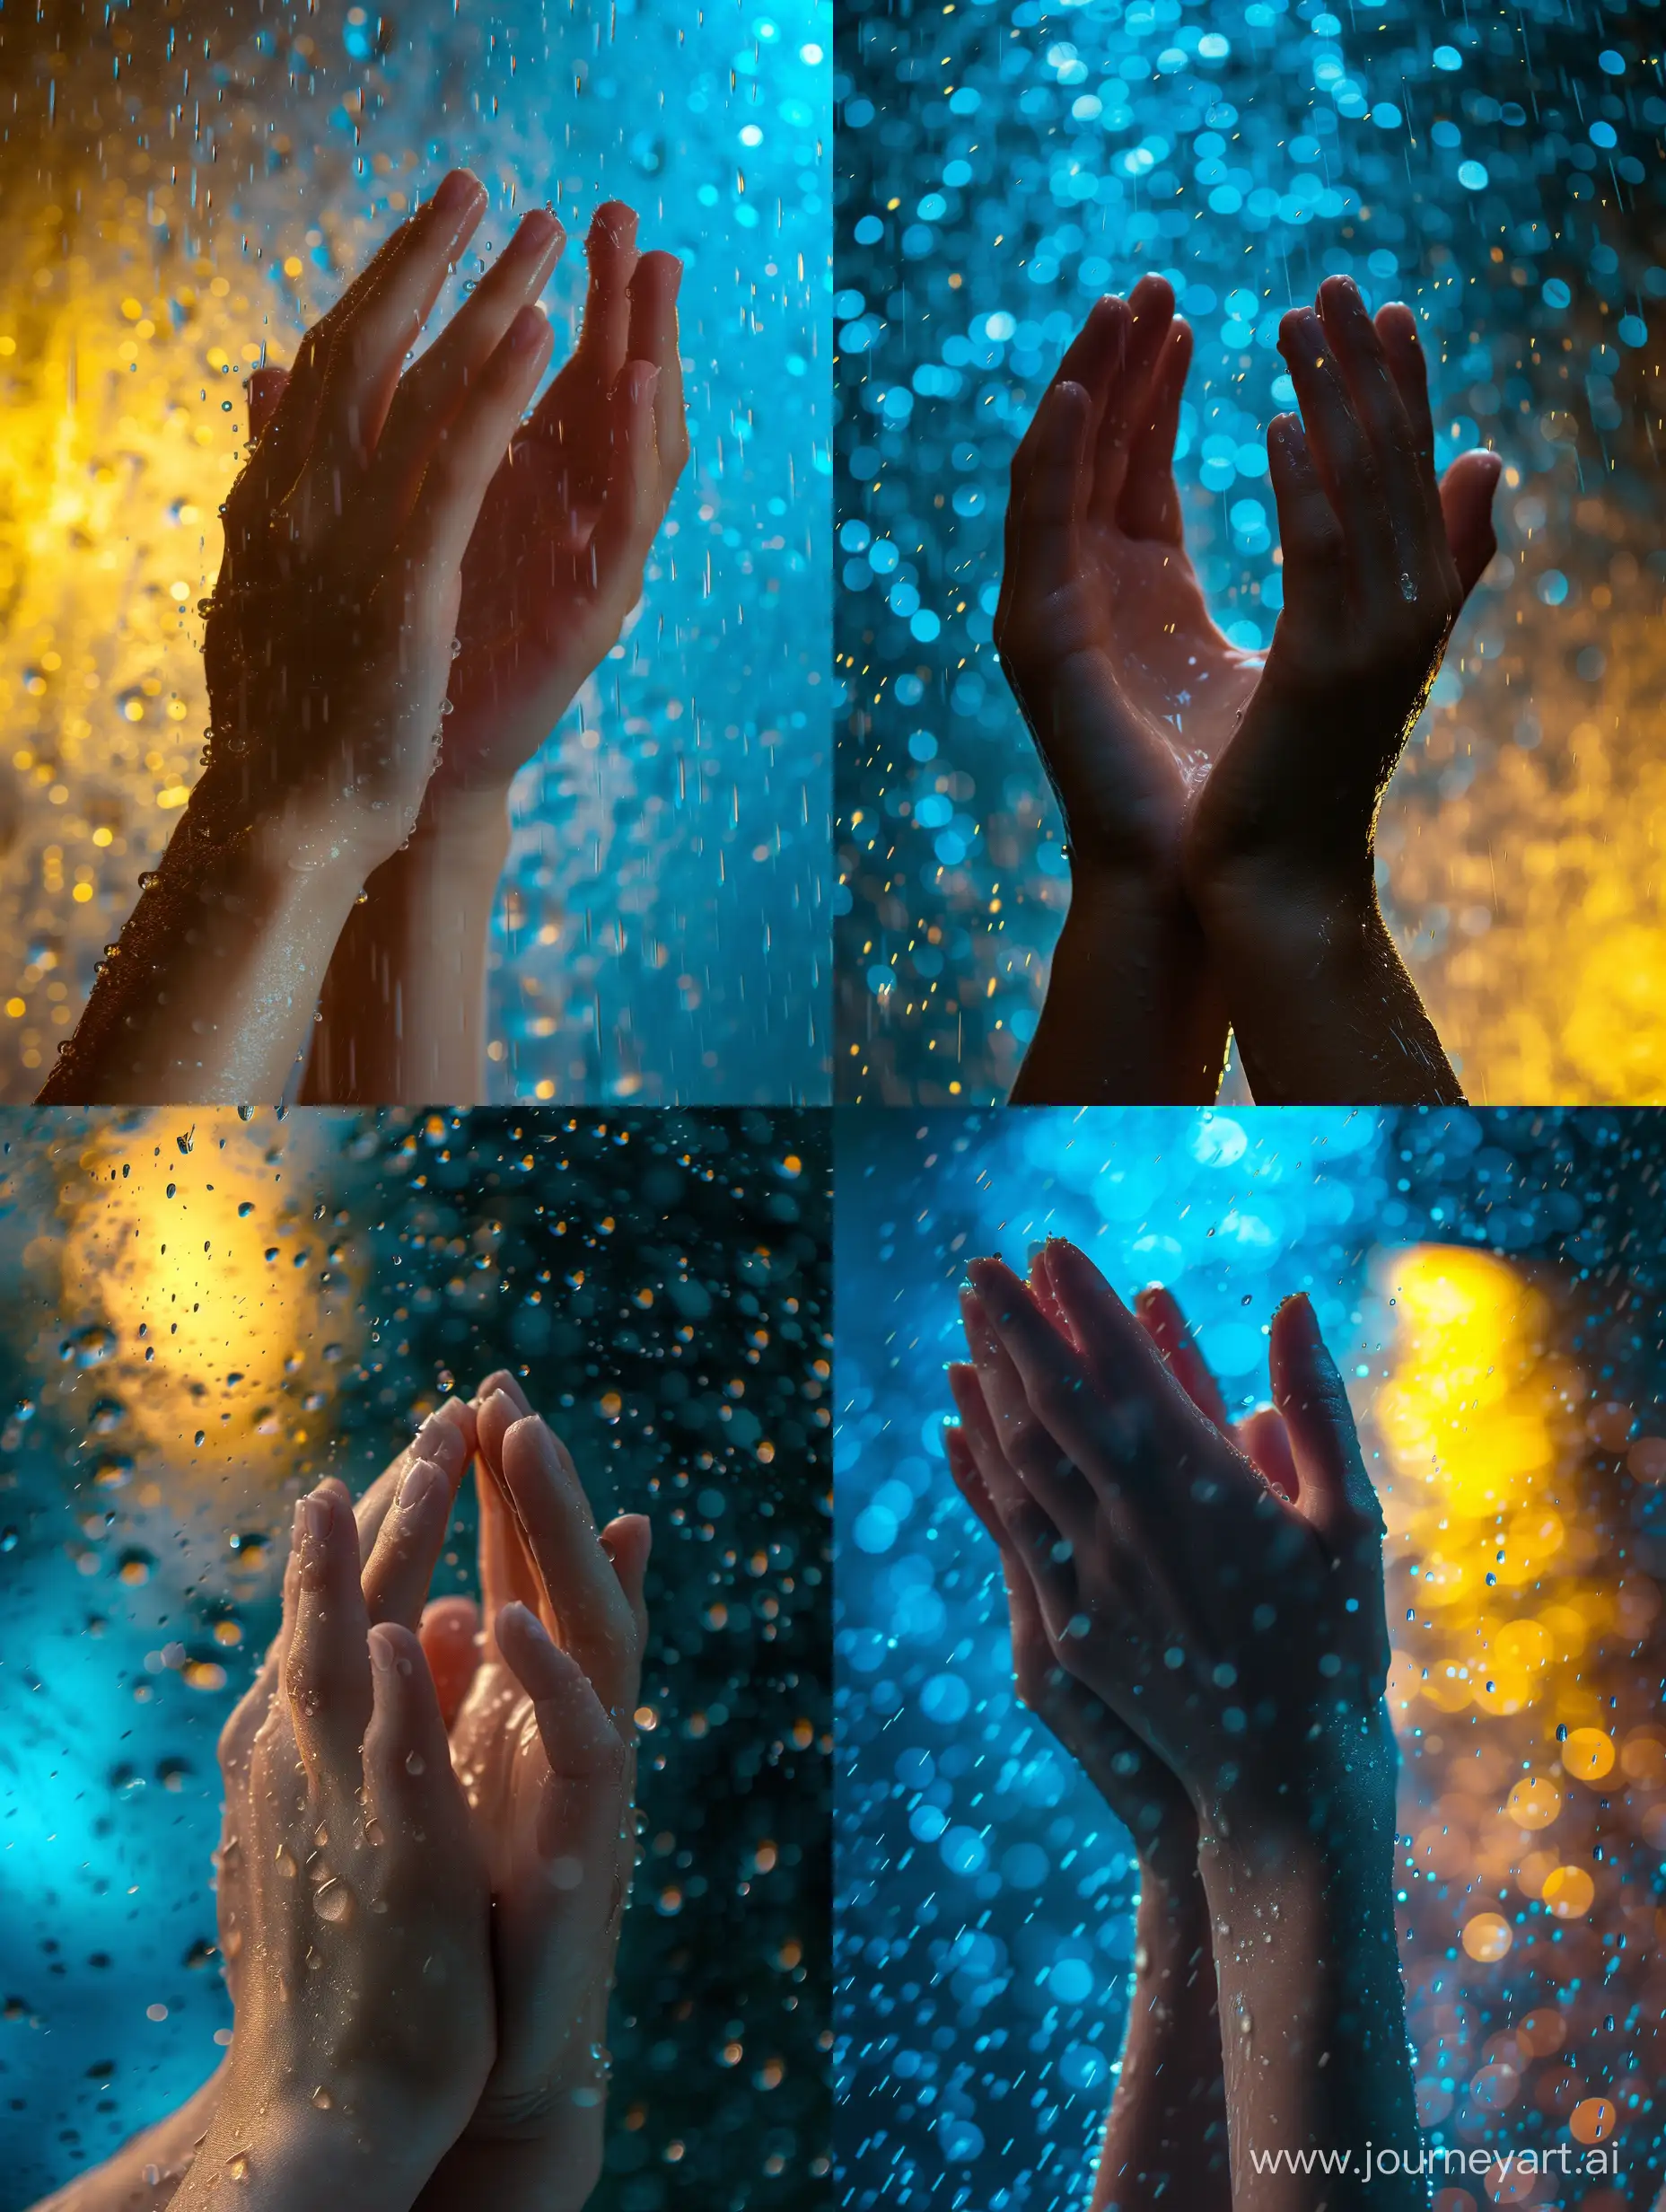 ultra realistic, close up, hands clasped while lifted up. little raindrops. behind there is a blue and yellow light. canon eos-id x mark iii dslr --v 6.0